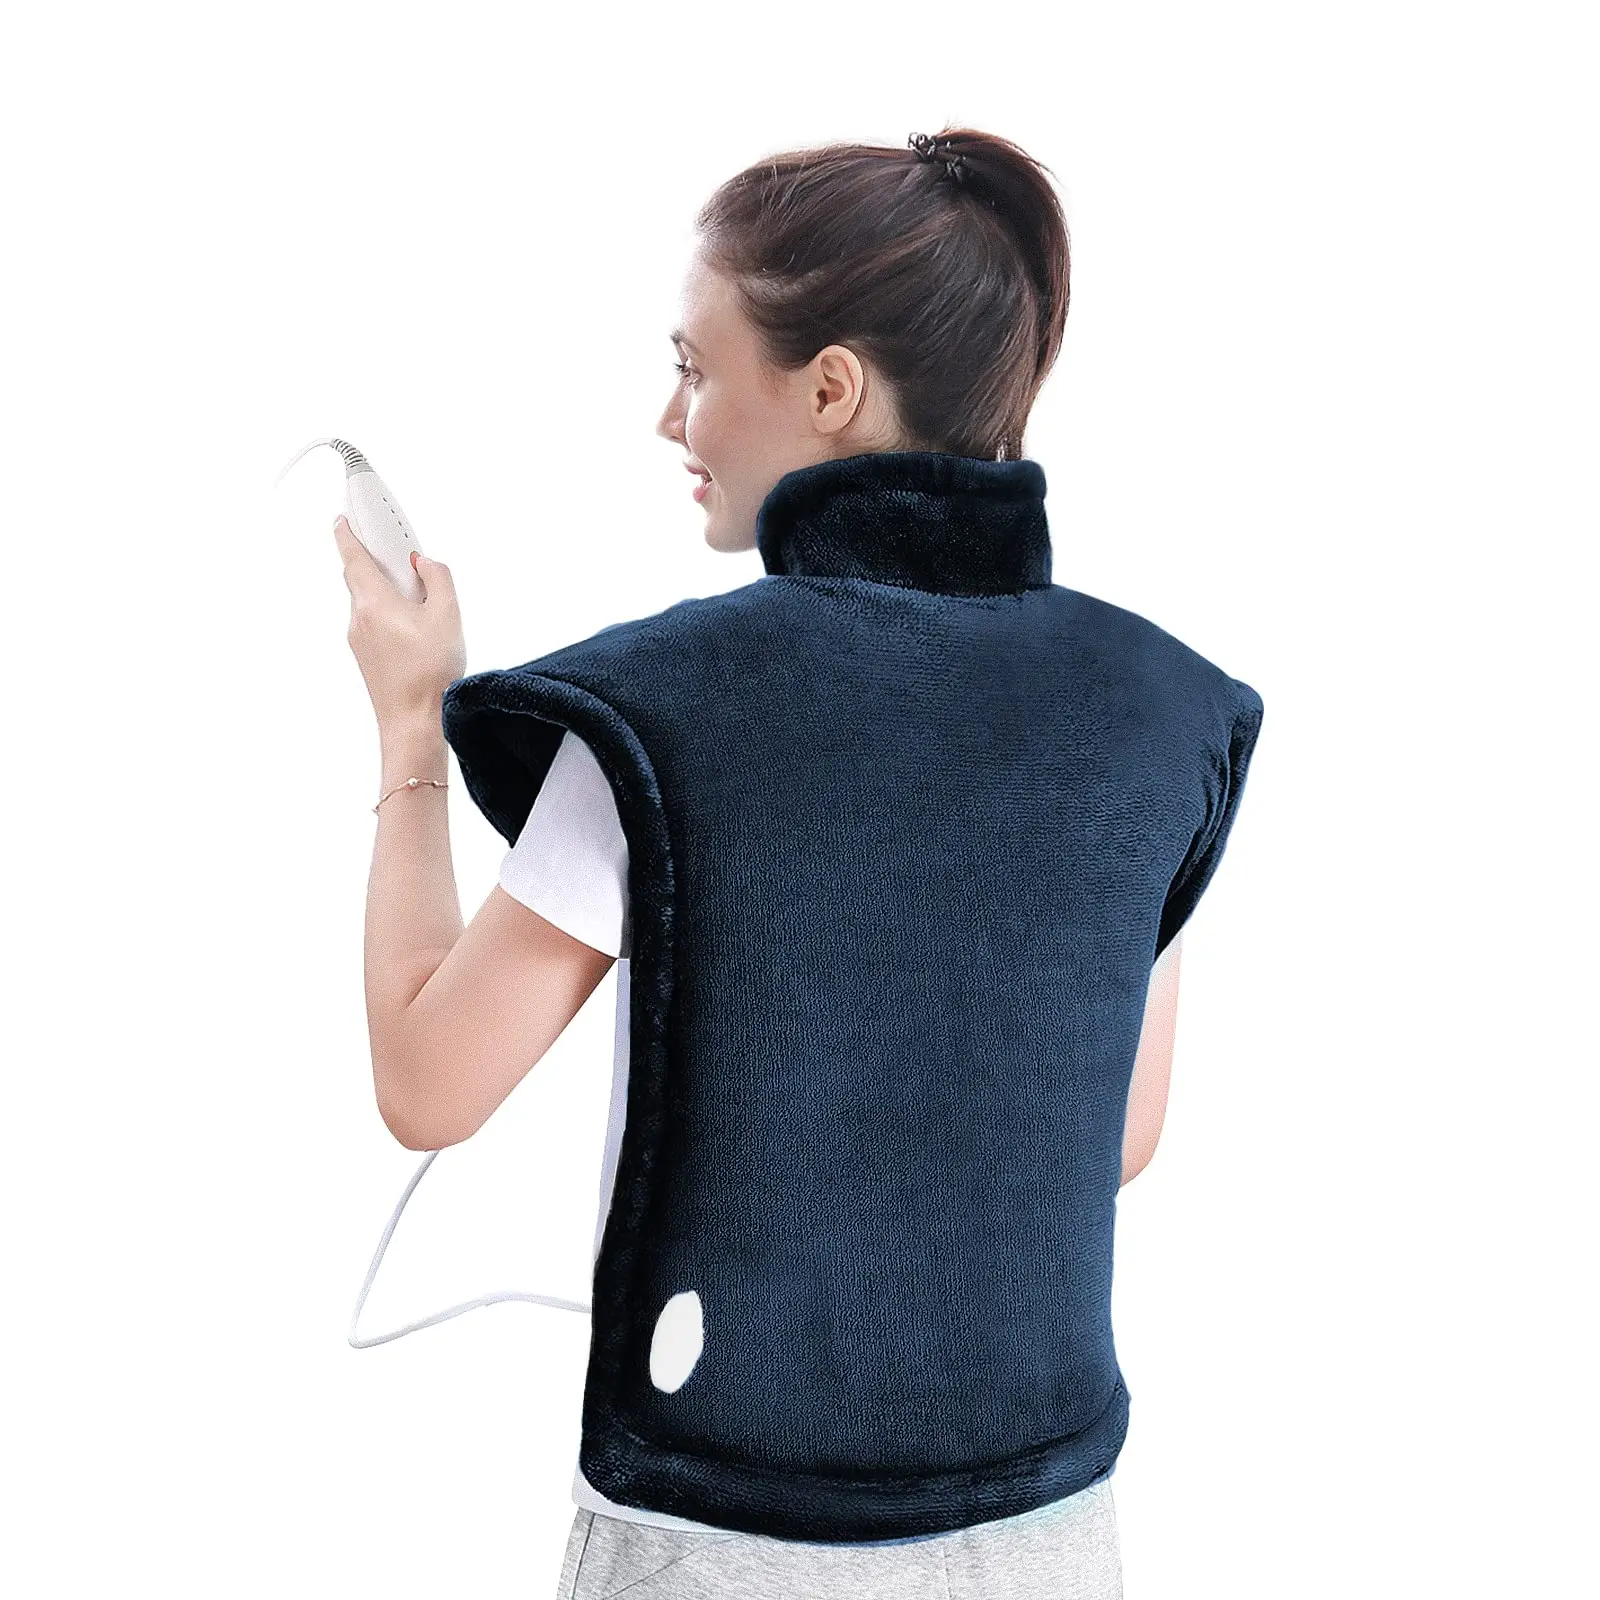 Heating Pad for Back and Shoulder Pain Relief, Electric Heat Wrap with Fast-Heating and 4 Heat Settings